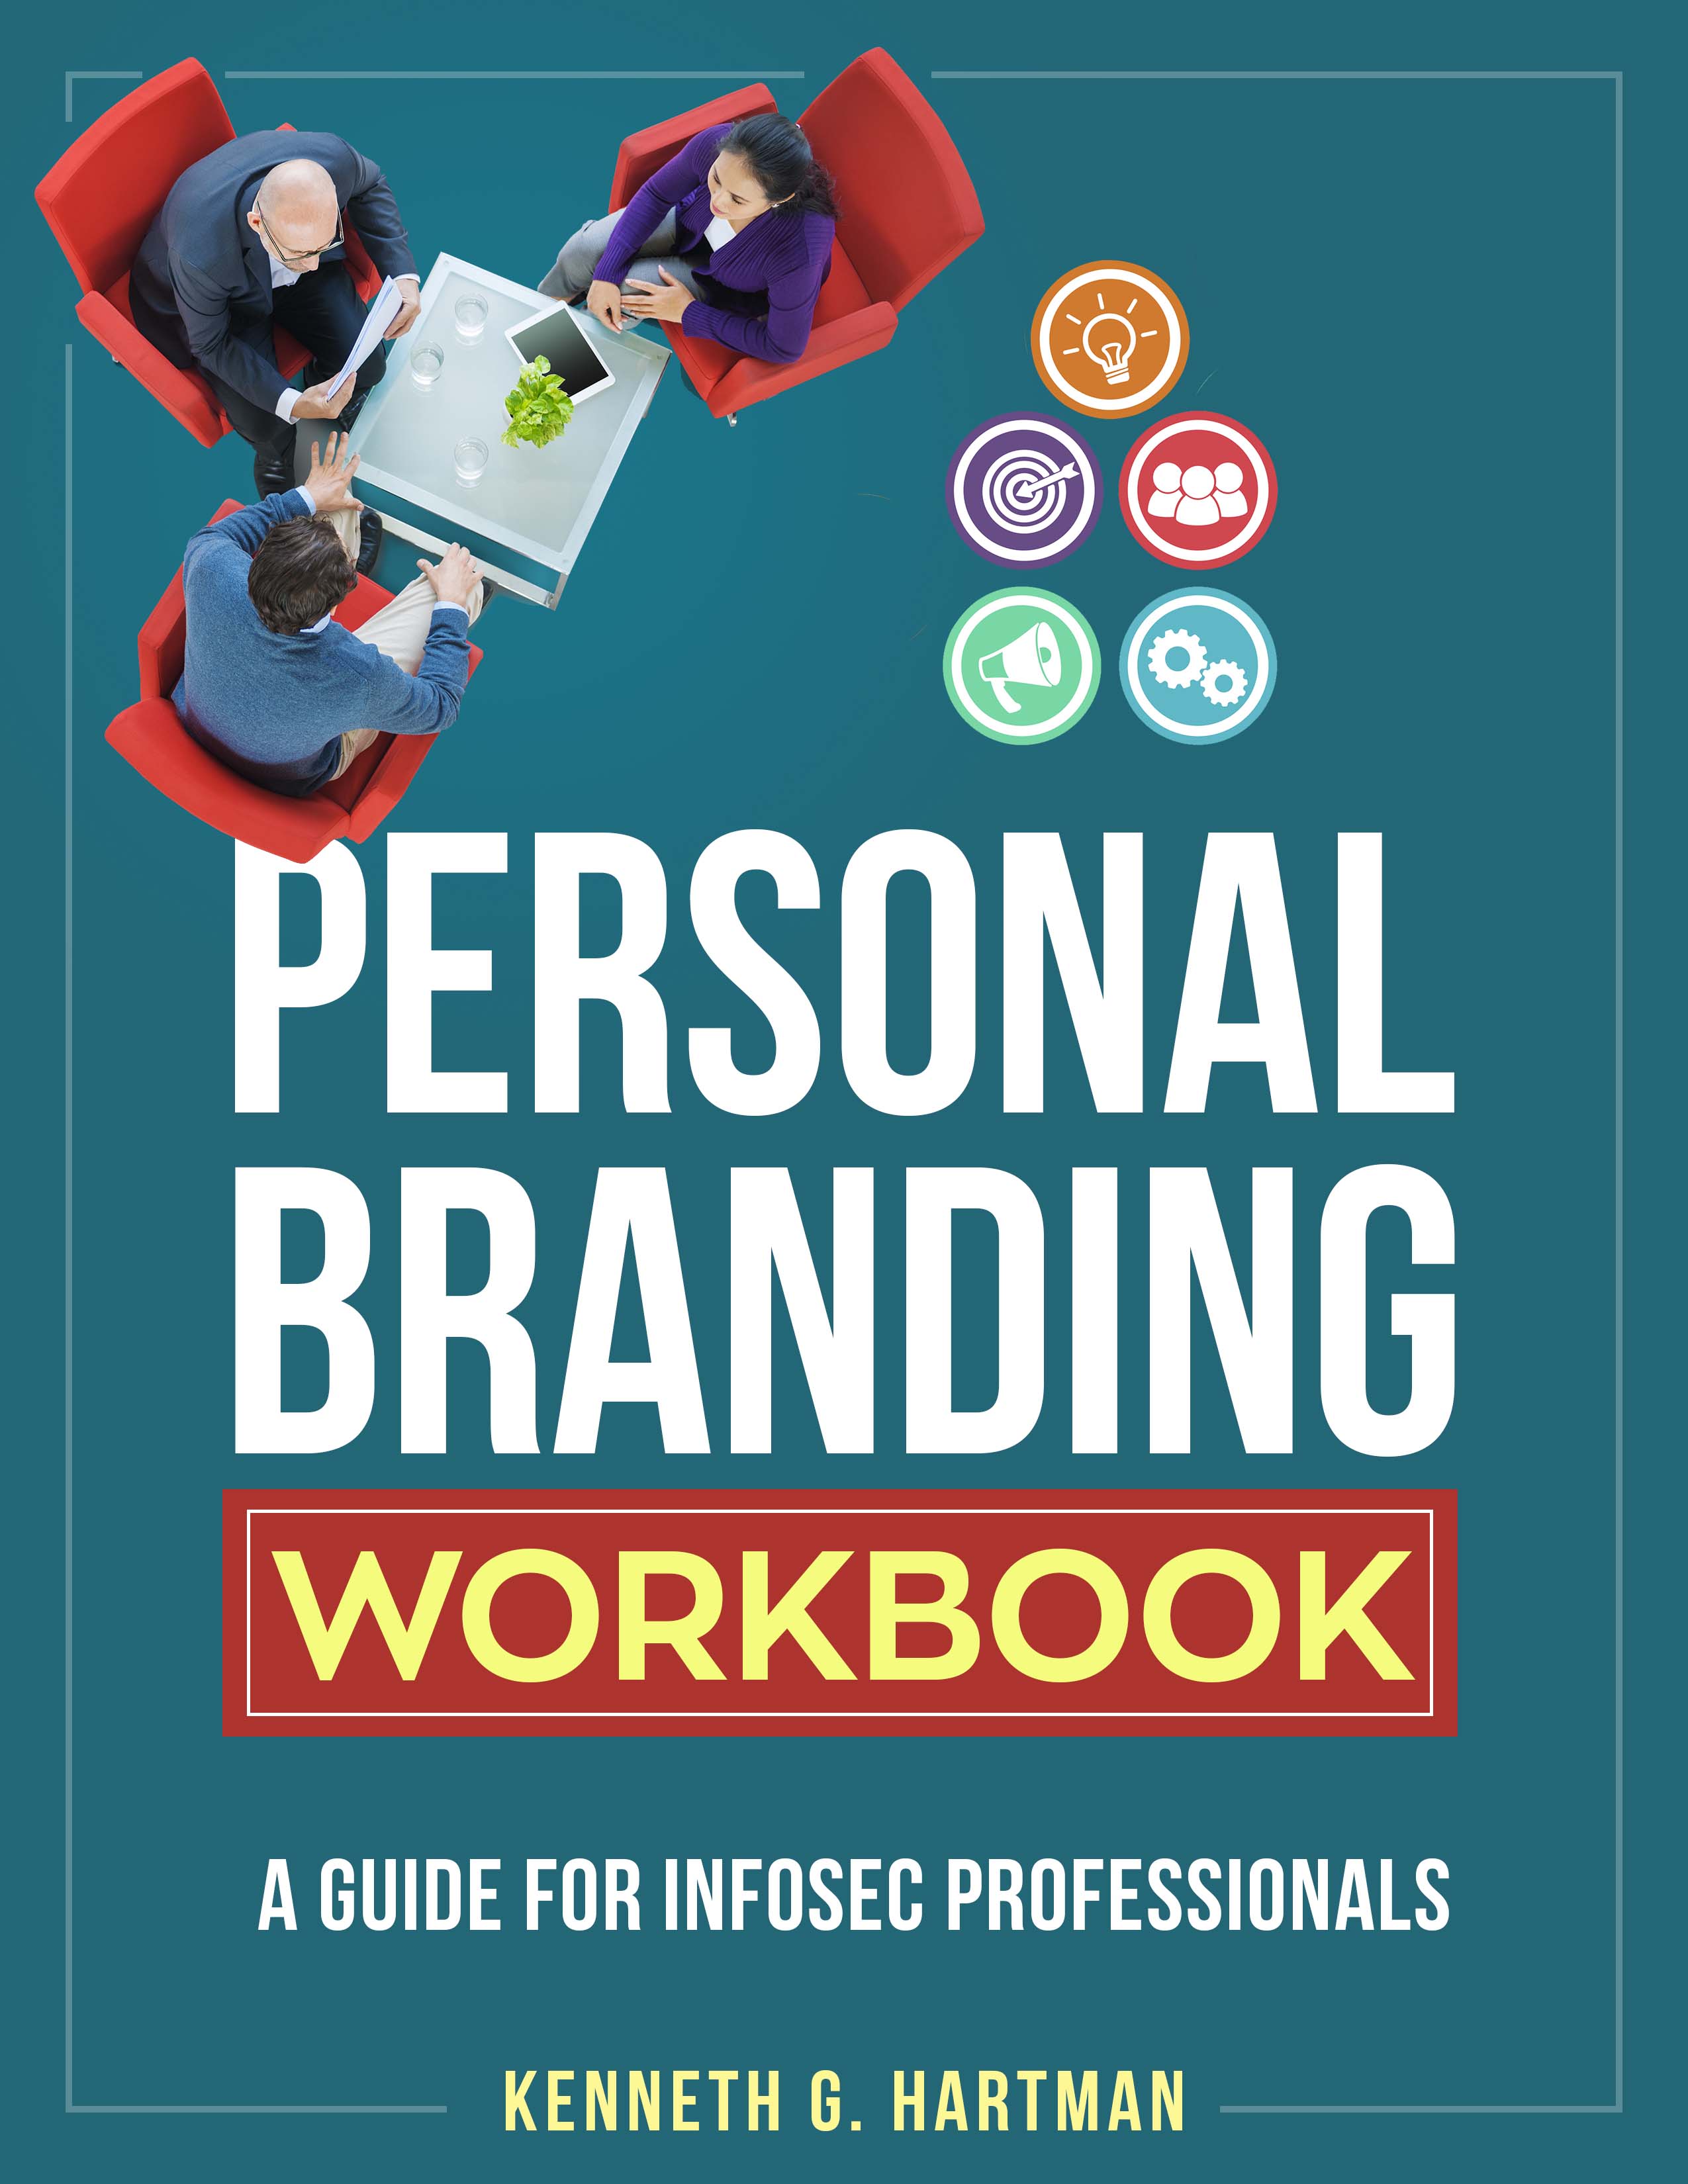 Personal Branding Workbook - A Guide for Infosec Professionals